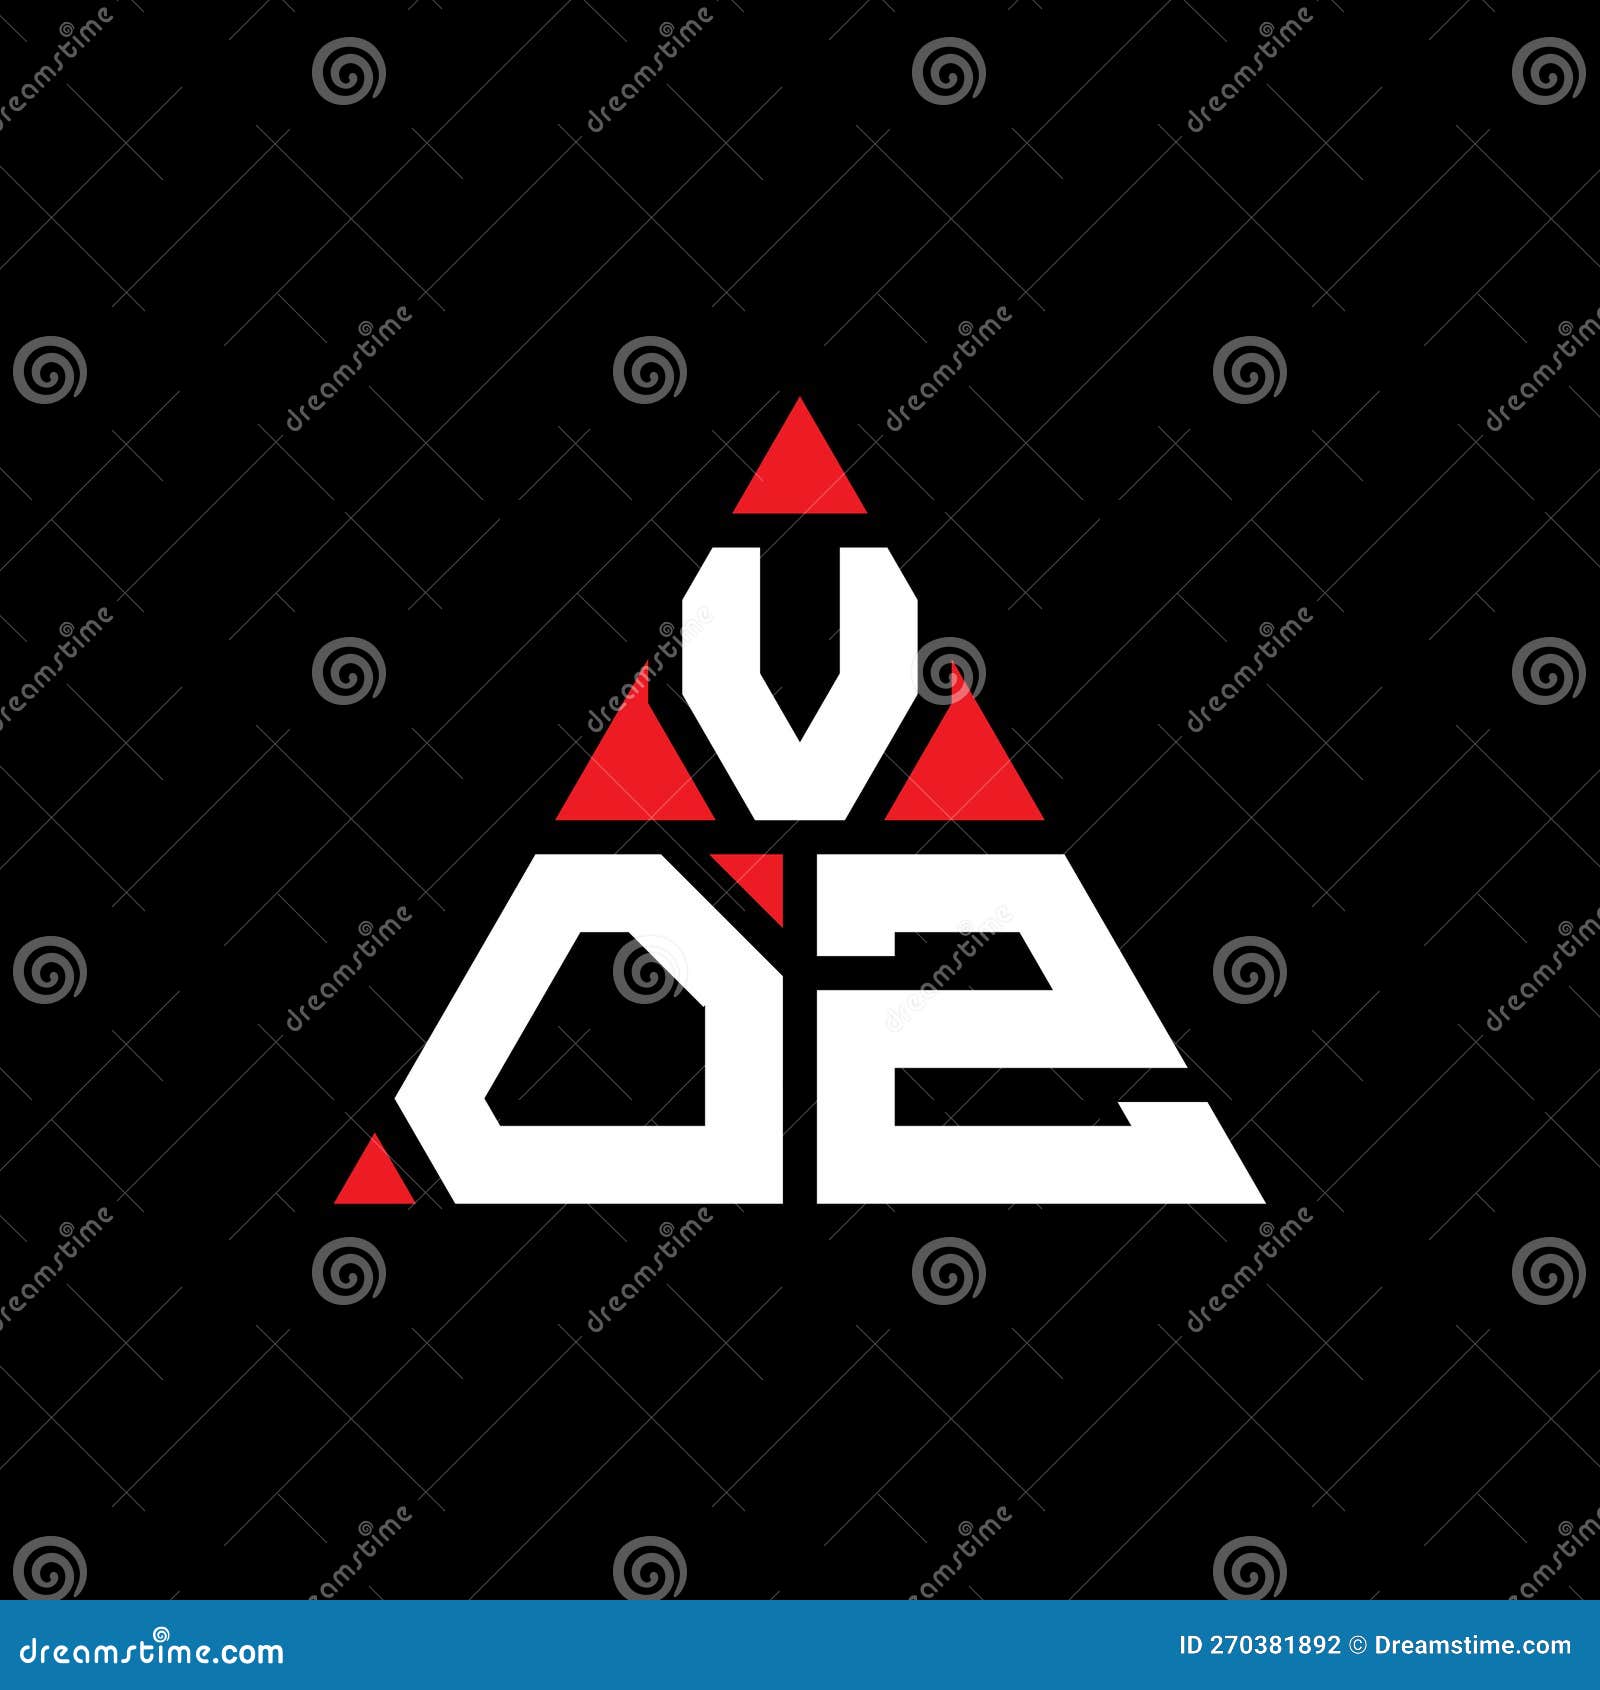 voz triangle letter logo  with triangle . voz triangle logo  monogram. voz triangle  logo template with red